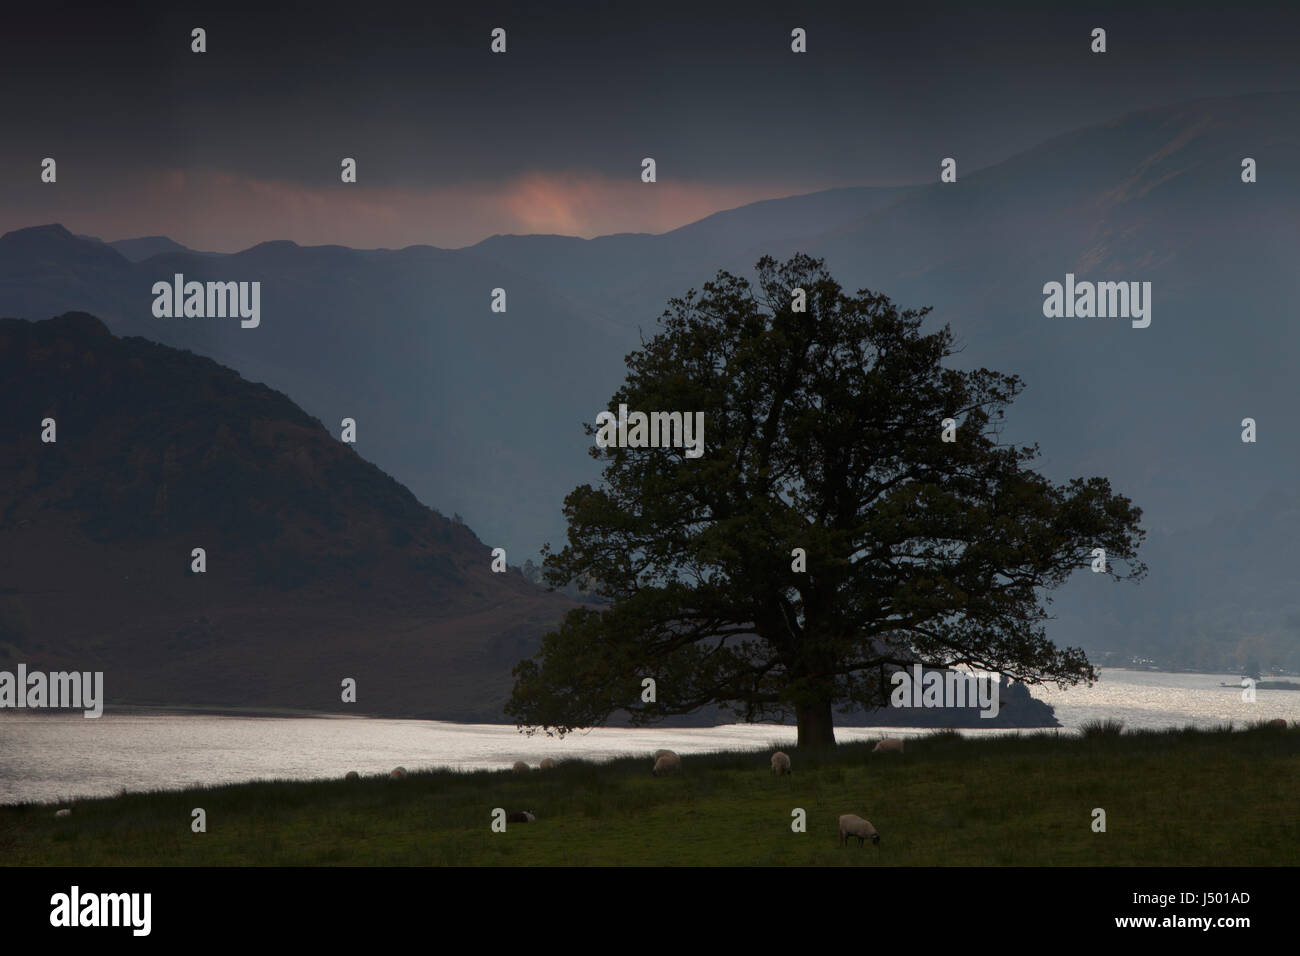 An oak tree on the shores of Ullswater in the English Lake District in an approaching rainstorm, with dark clouds and silhouettes Stock Photo